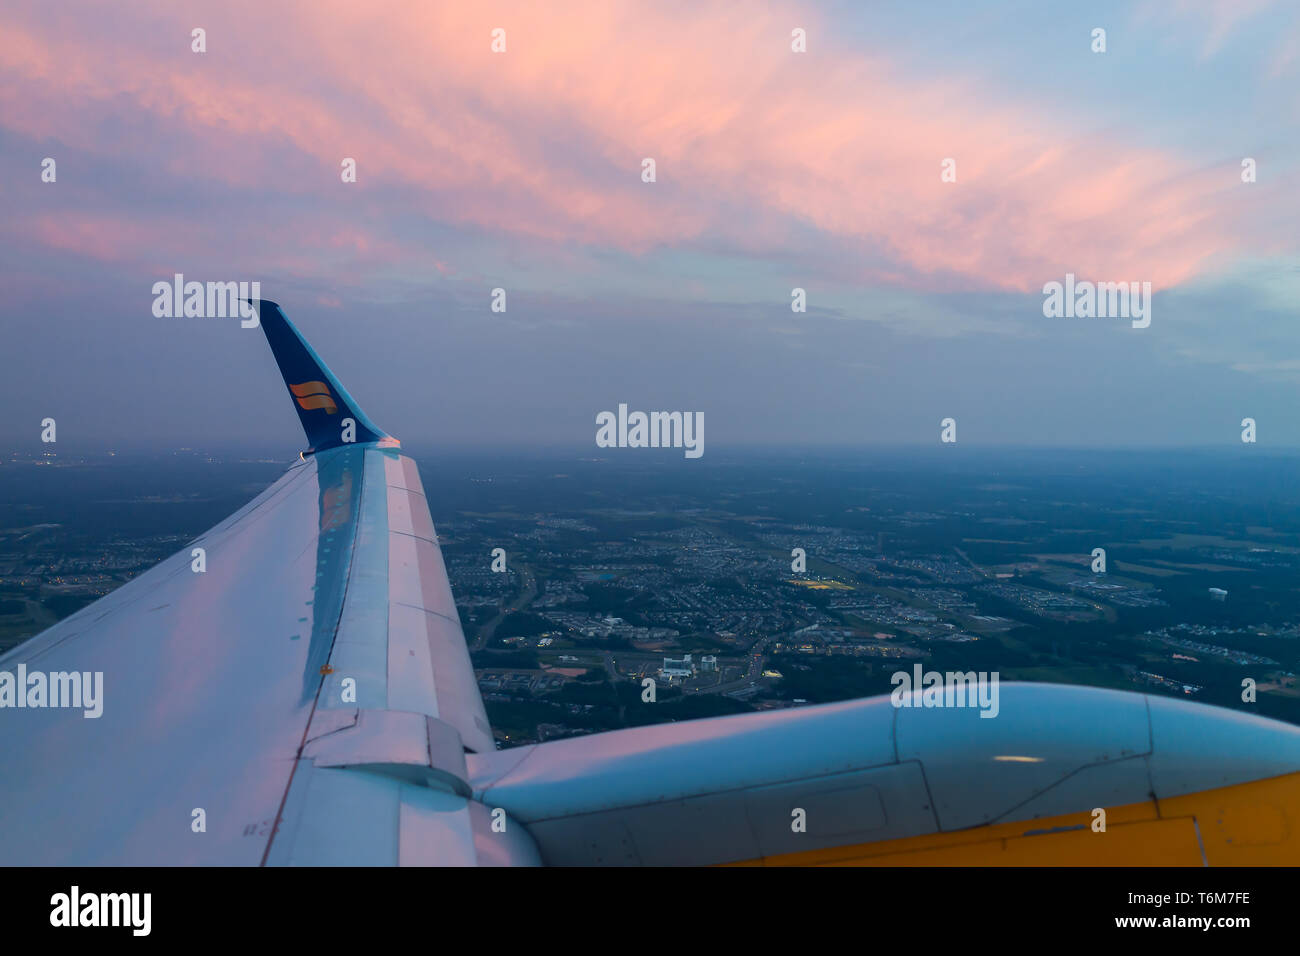 Dulles, USA - June 13, 2018: Icelandair airplane in sky from window high angle view over Atlantic Arctic ocean during sunset plane wing by airport in  Stock Photo